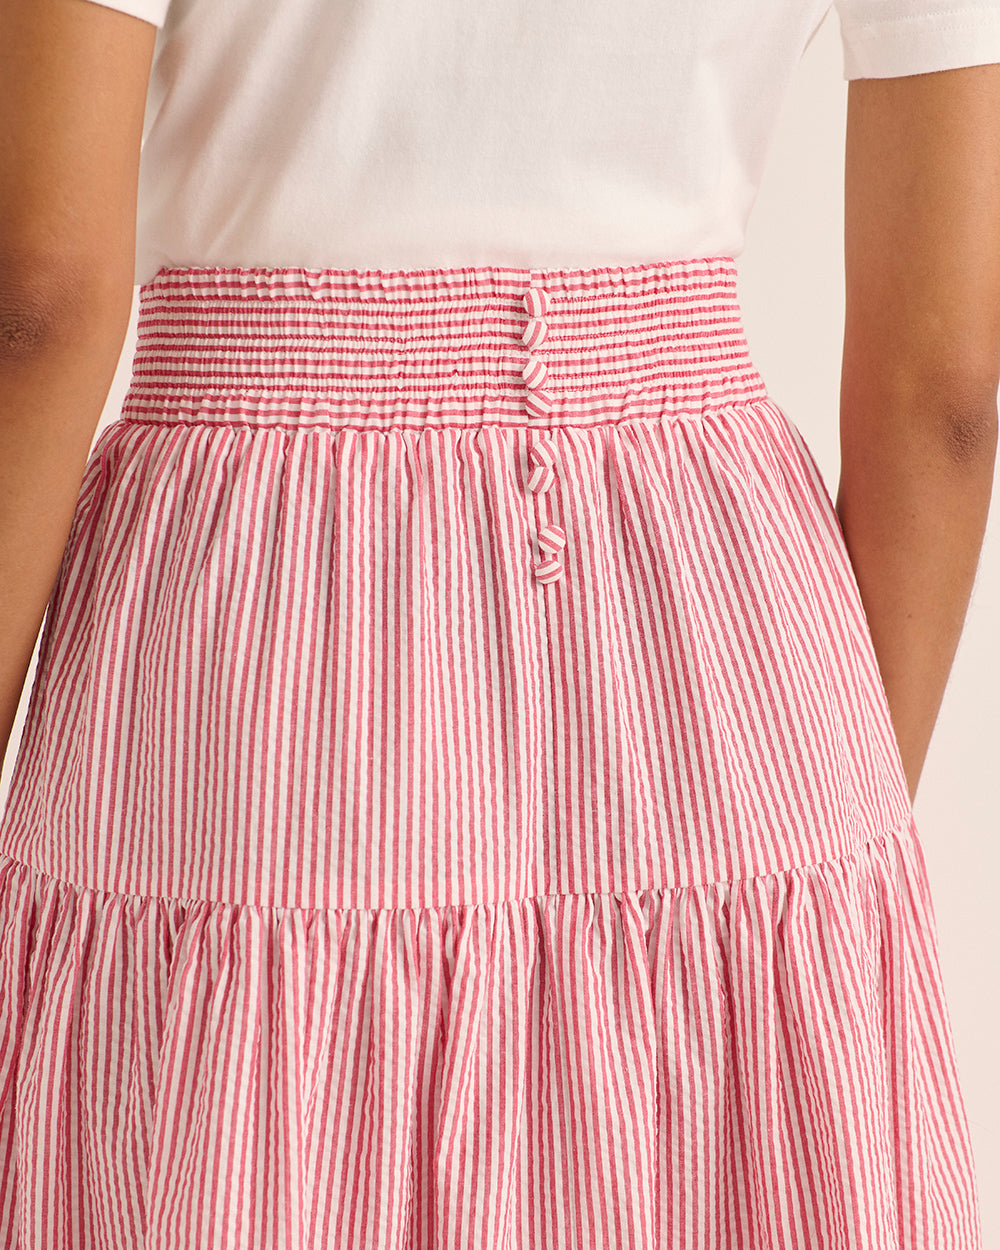 Gaby red and white striped skirt